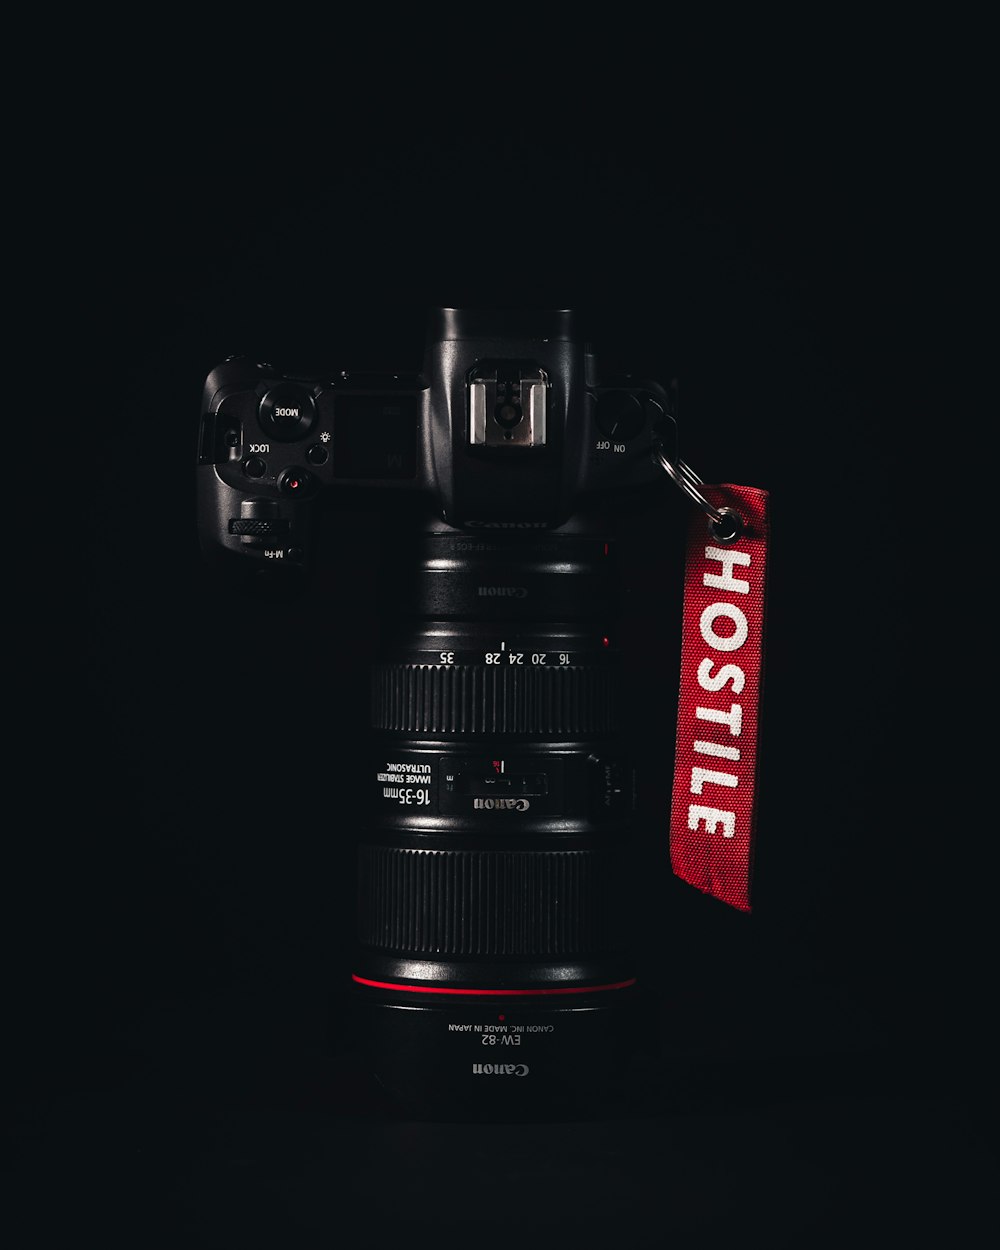 a black camera with a red label